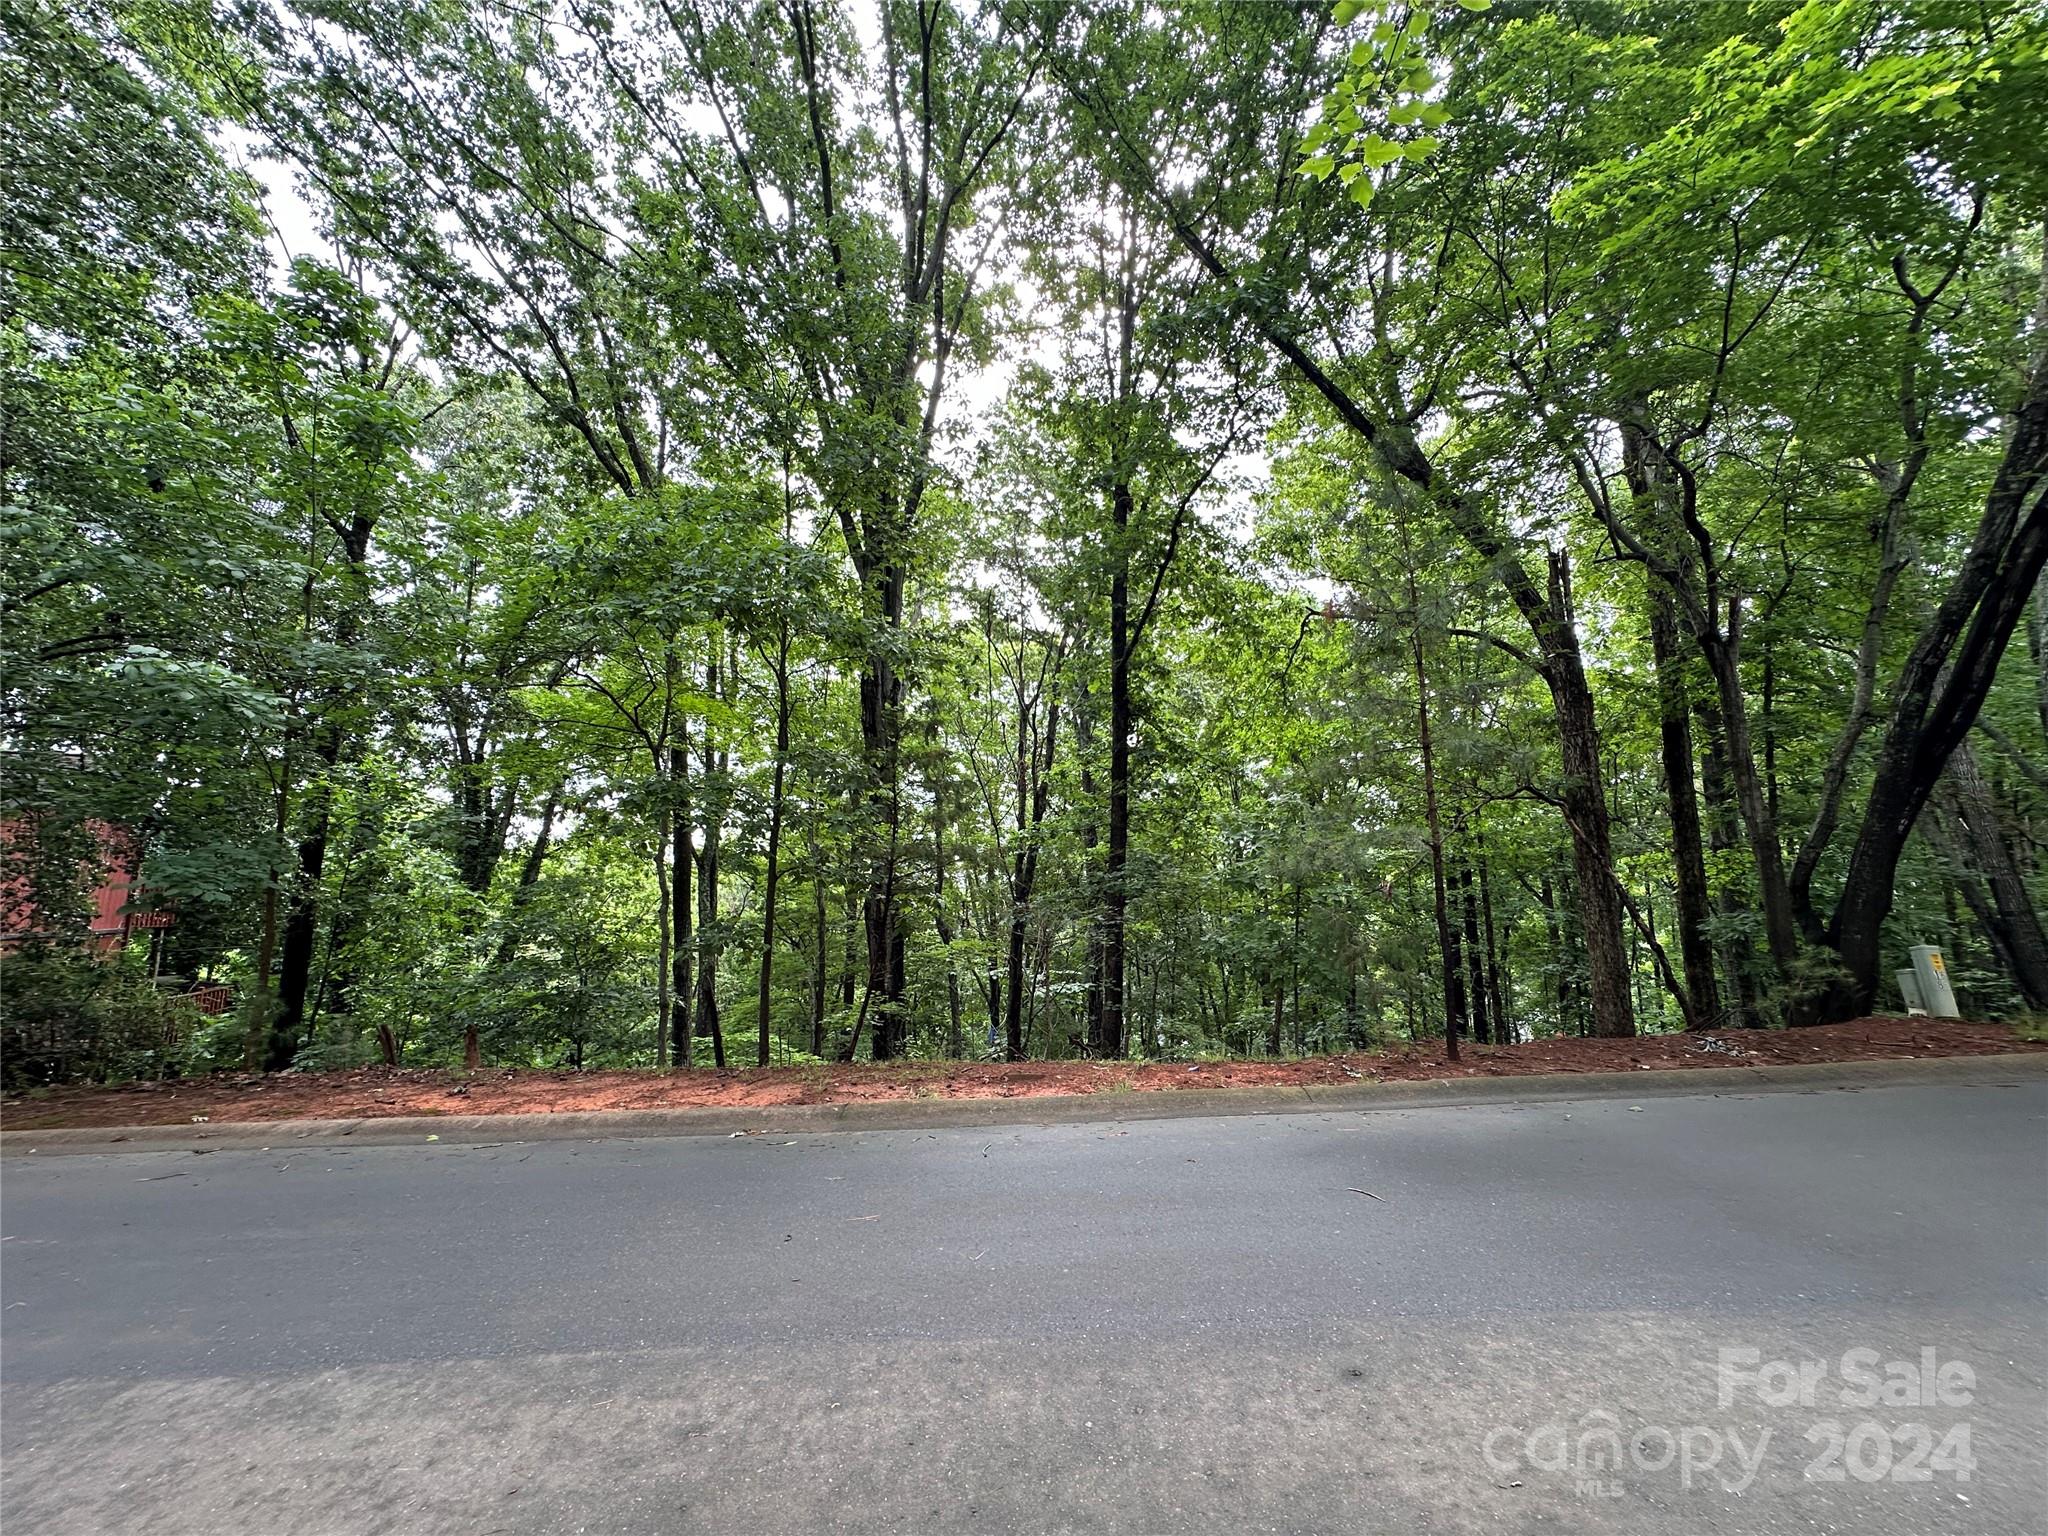 a view of a road with a trees